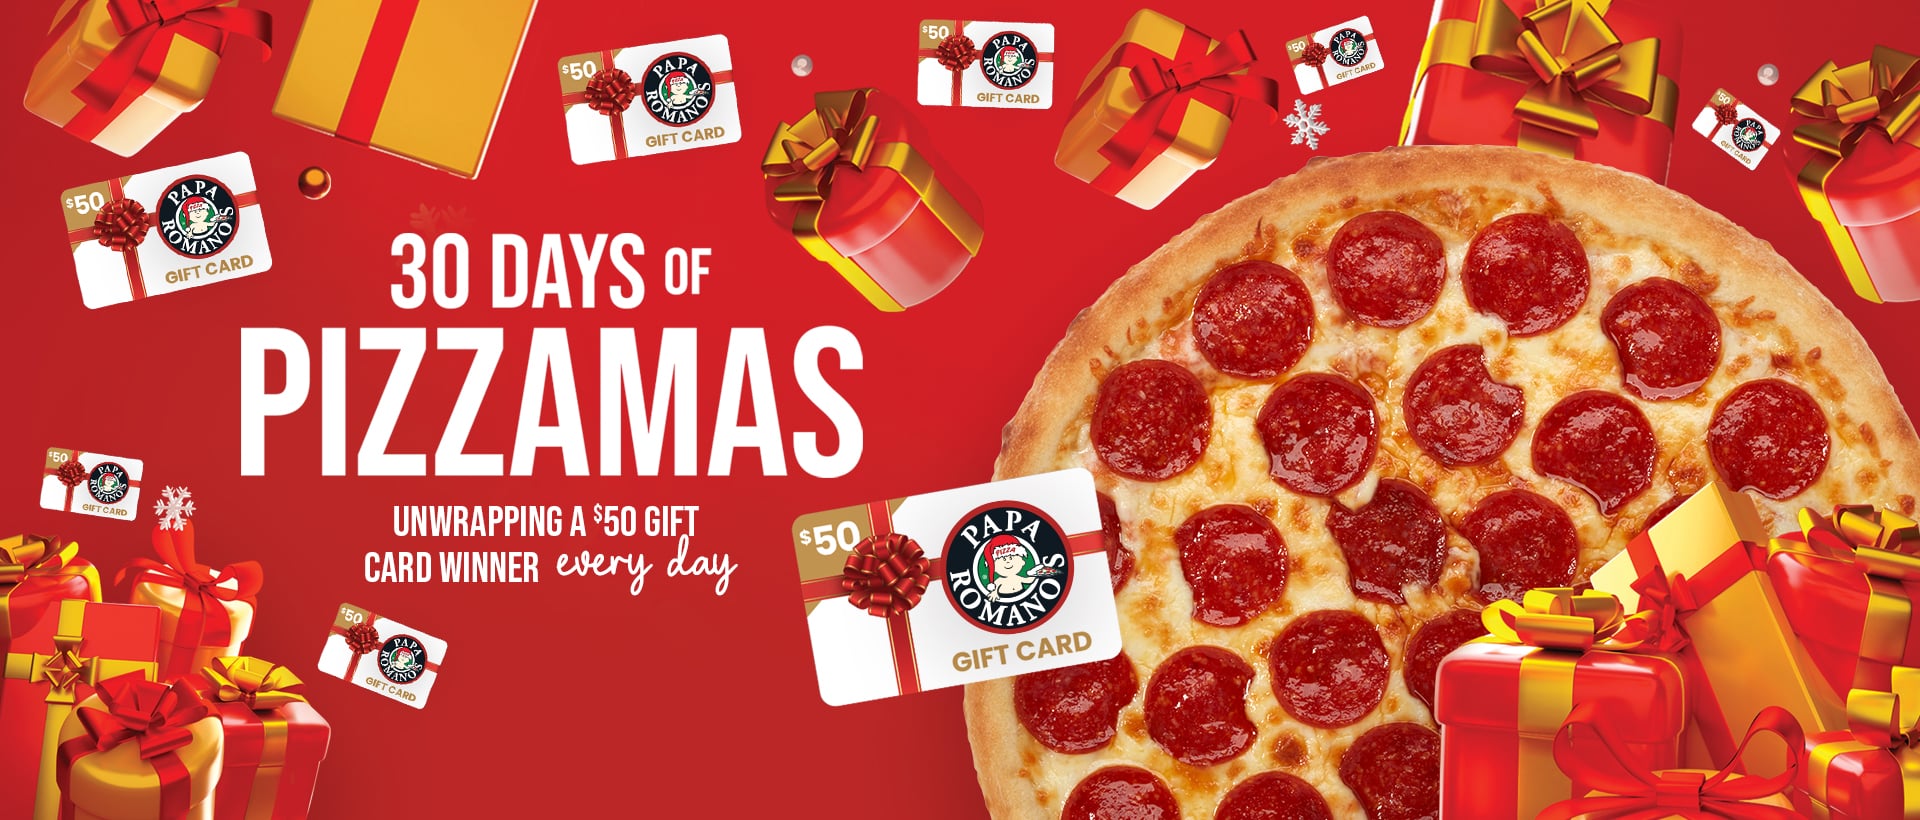 30 Days of Pizzamas